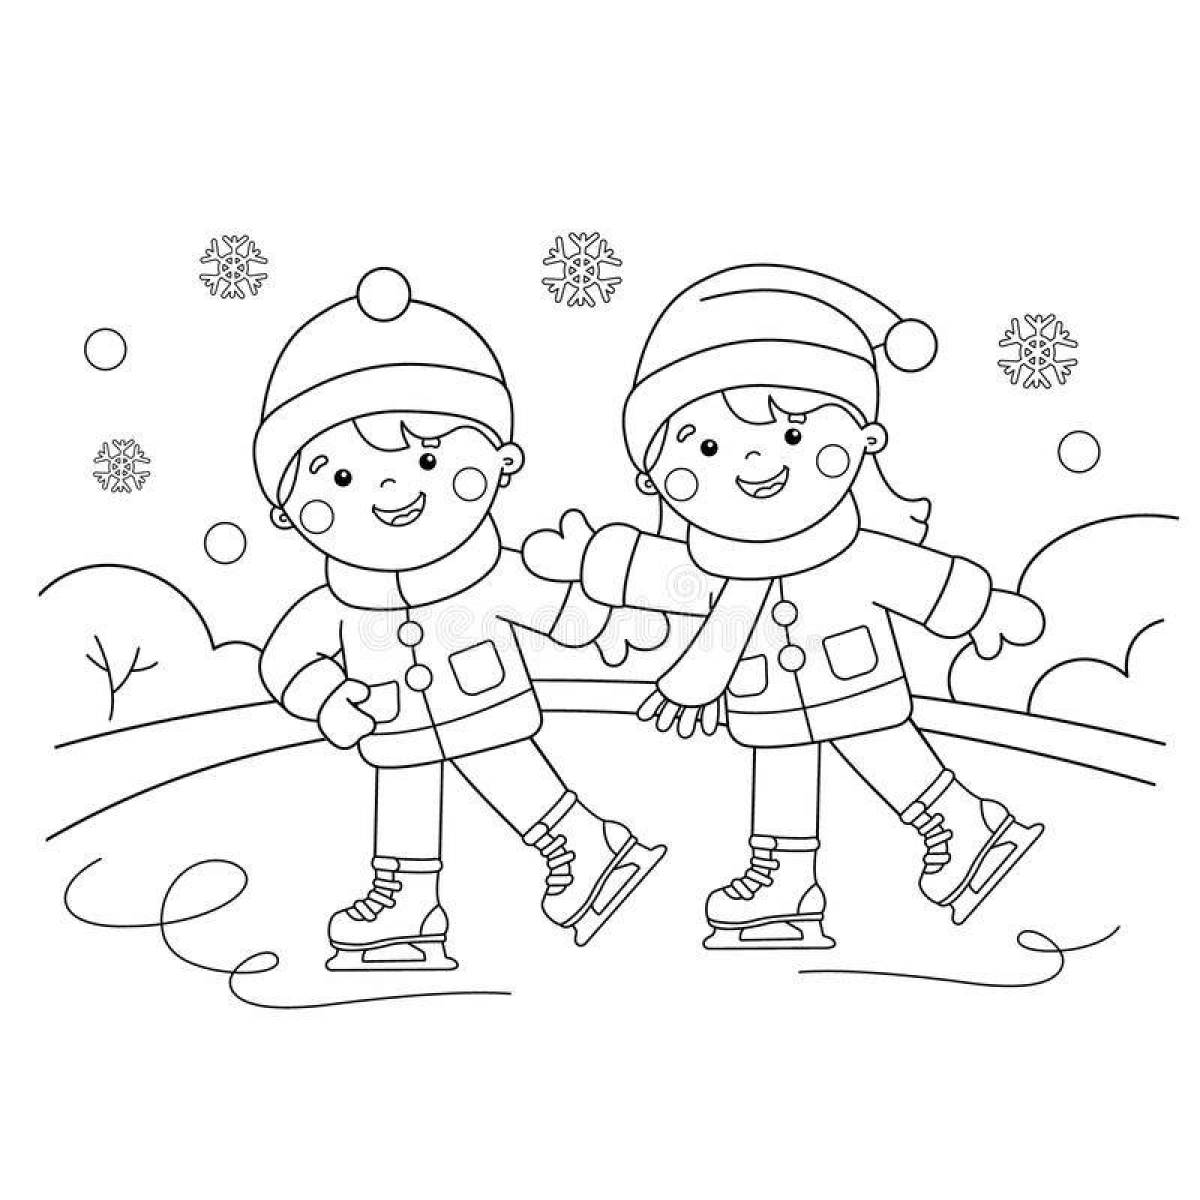 Color-frenzy winter sports coloring page